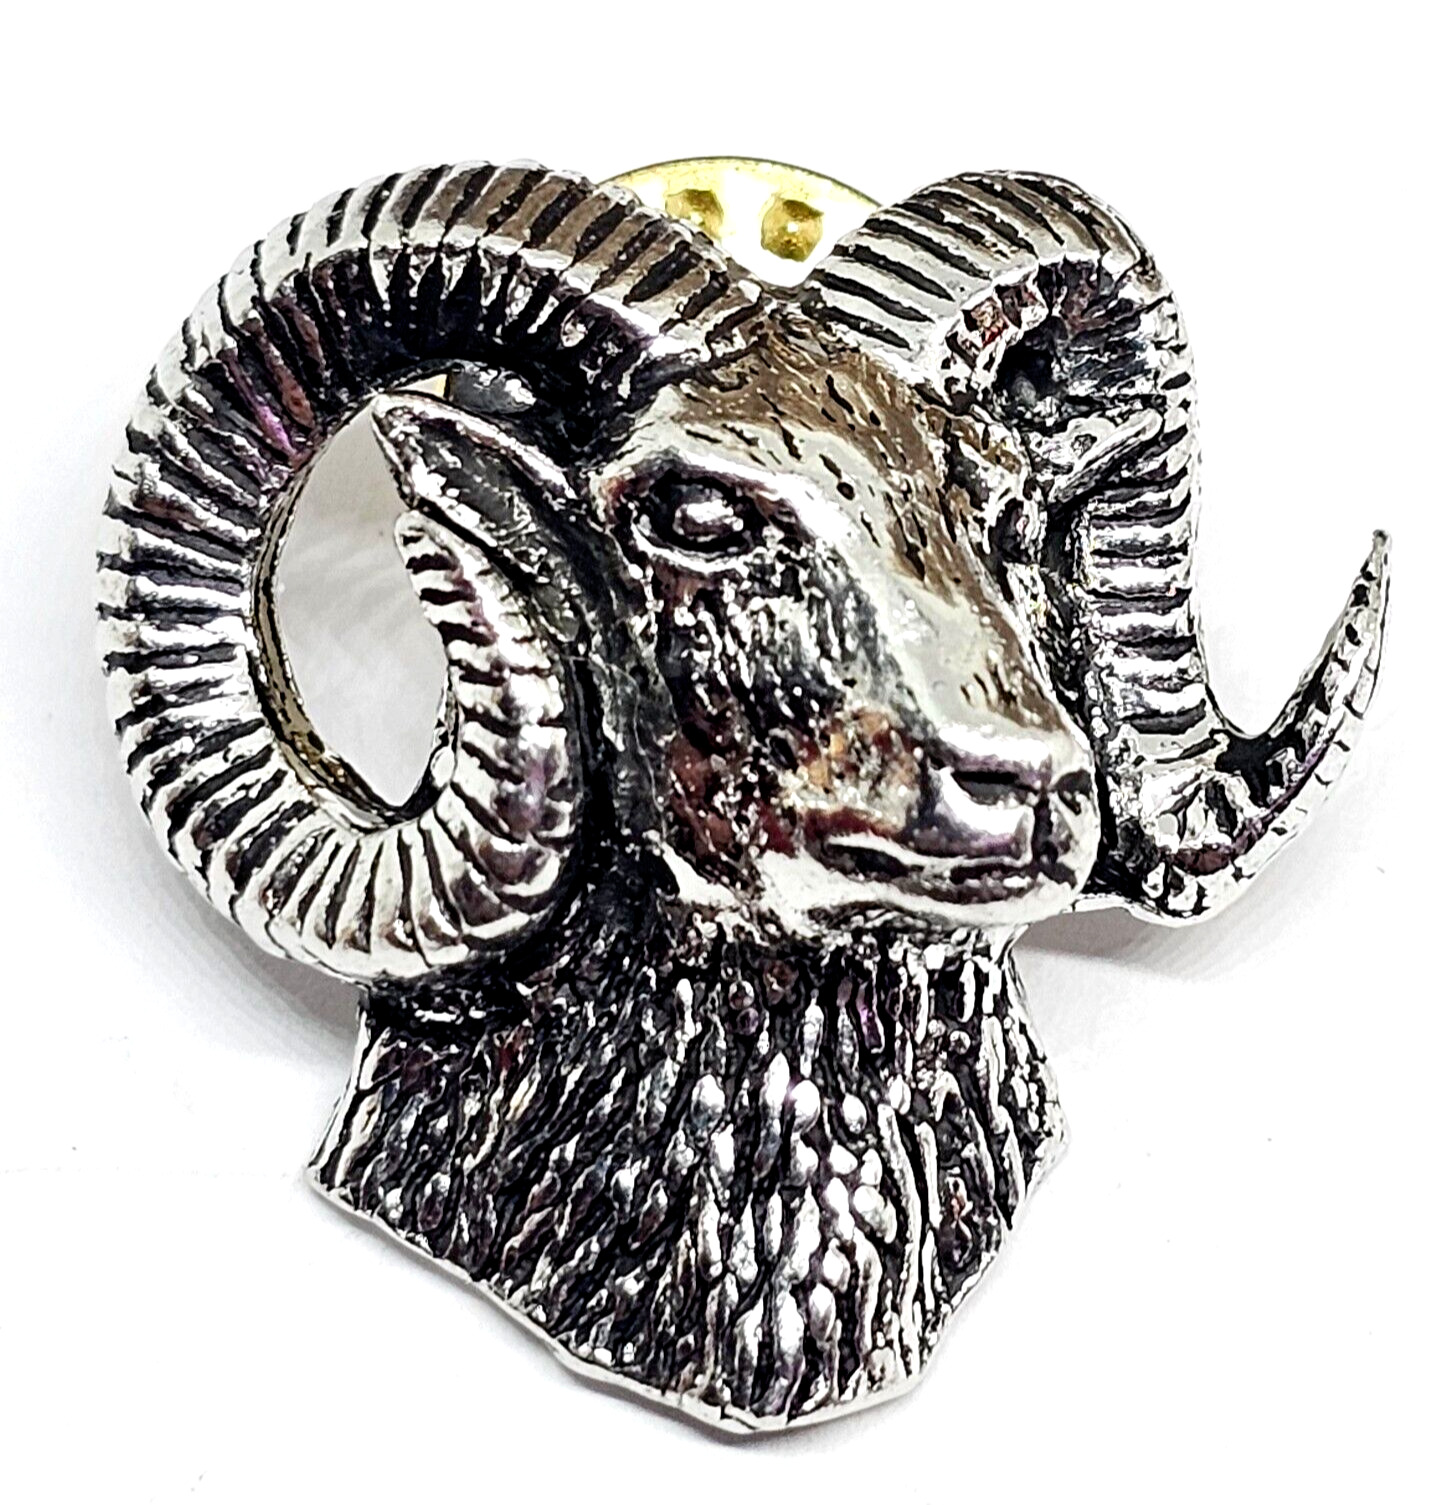 Mouflon Ram Pin Badge Pewter Brooch Sheep Pin Made By Famous A R Brown UK Made